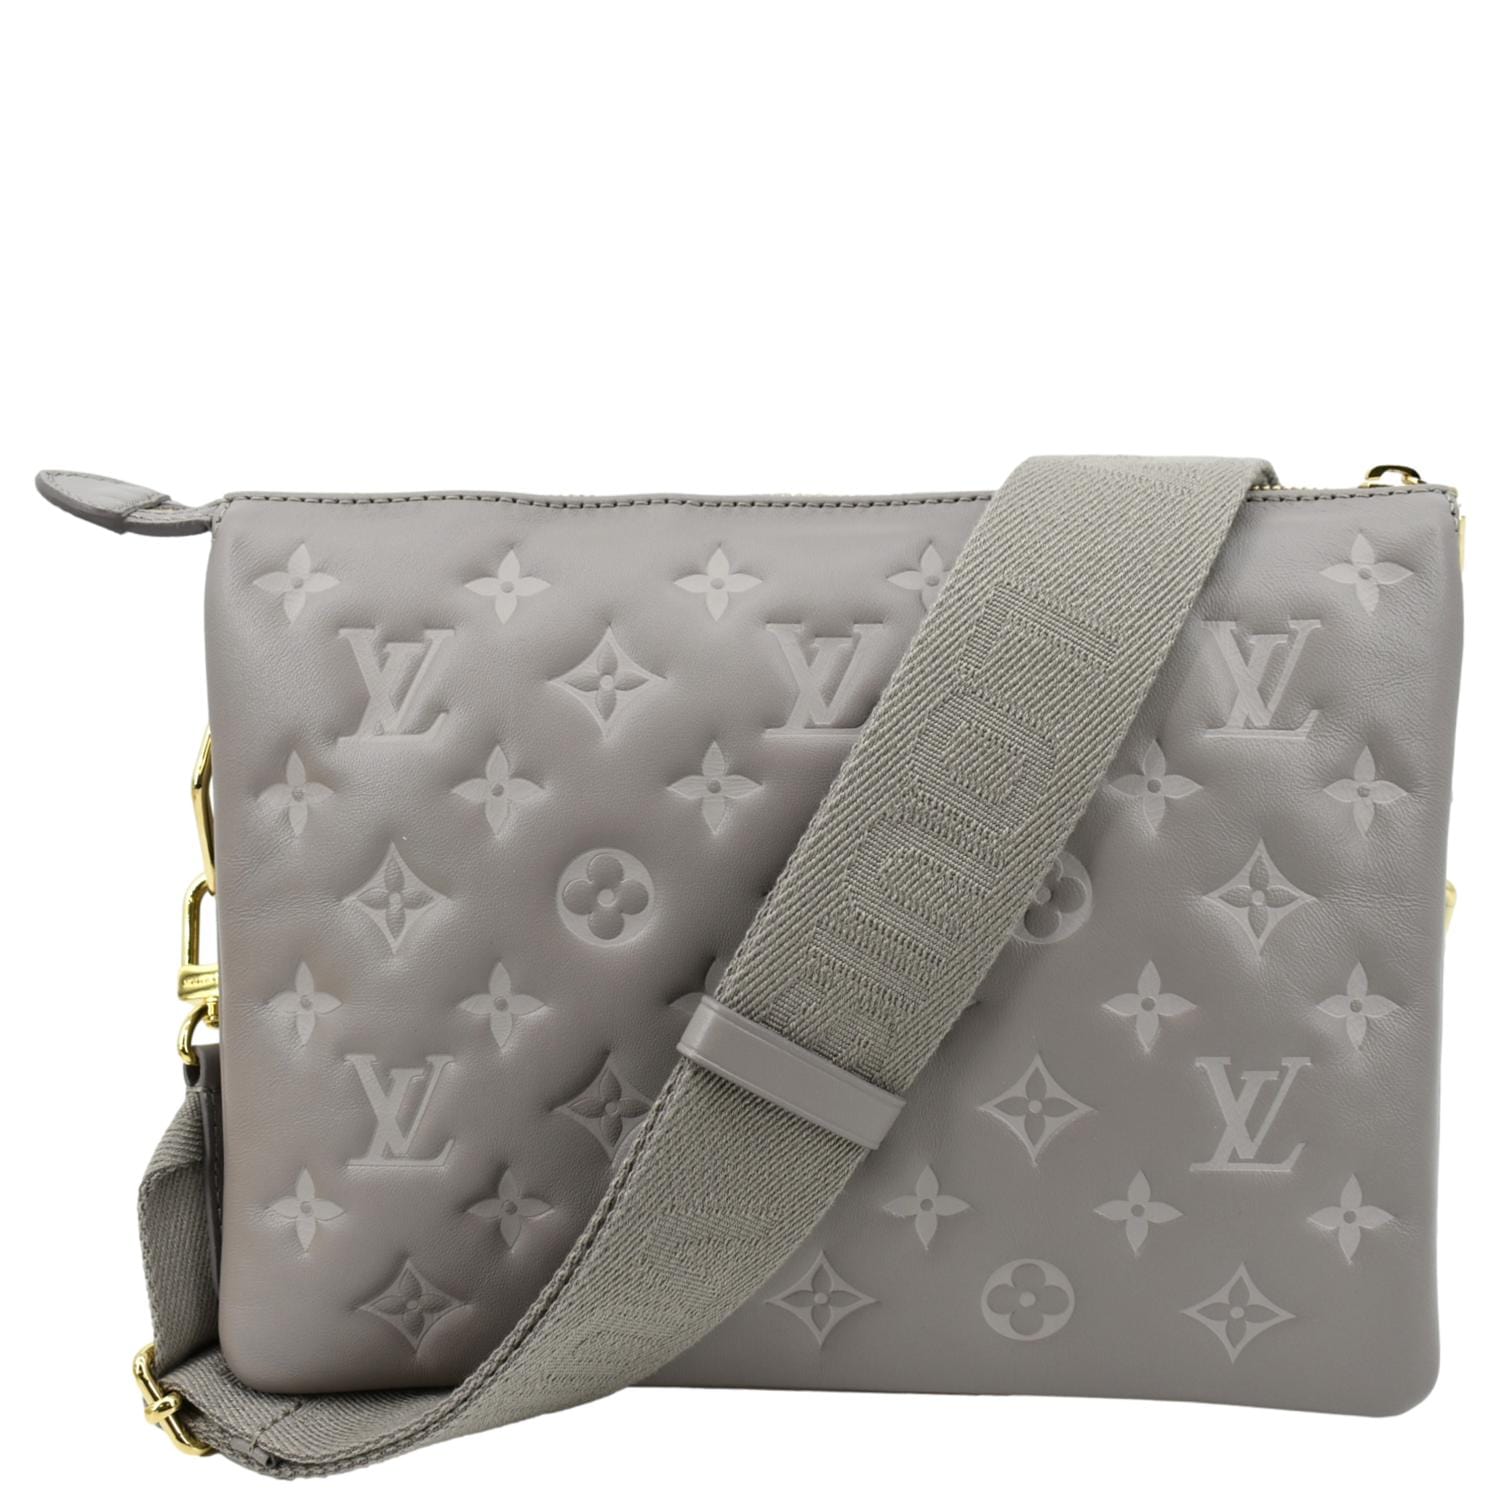 Louis Vuitton Coussin PM Shoulder Bag Silver Monogram Embossed Leather Crossbody